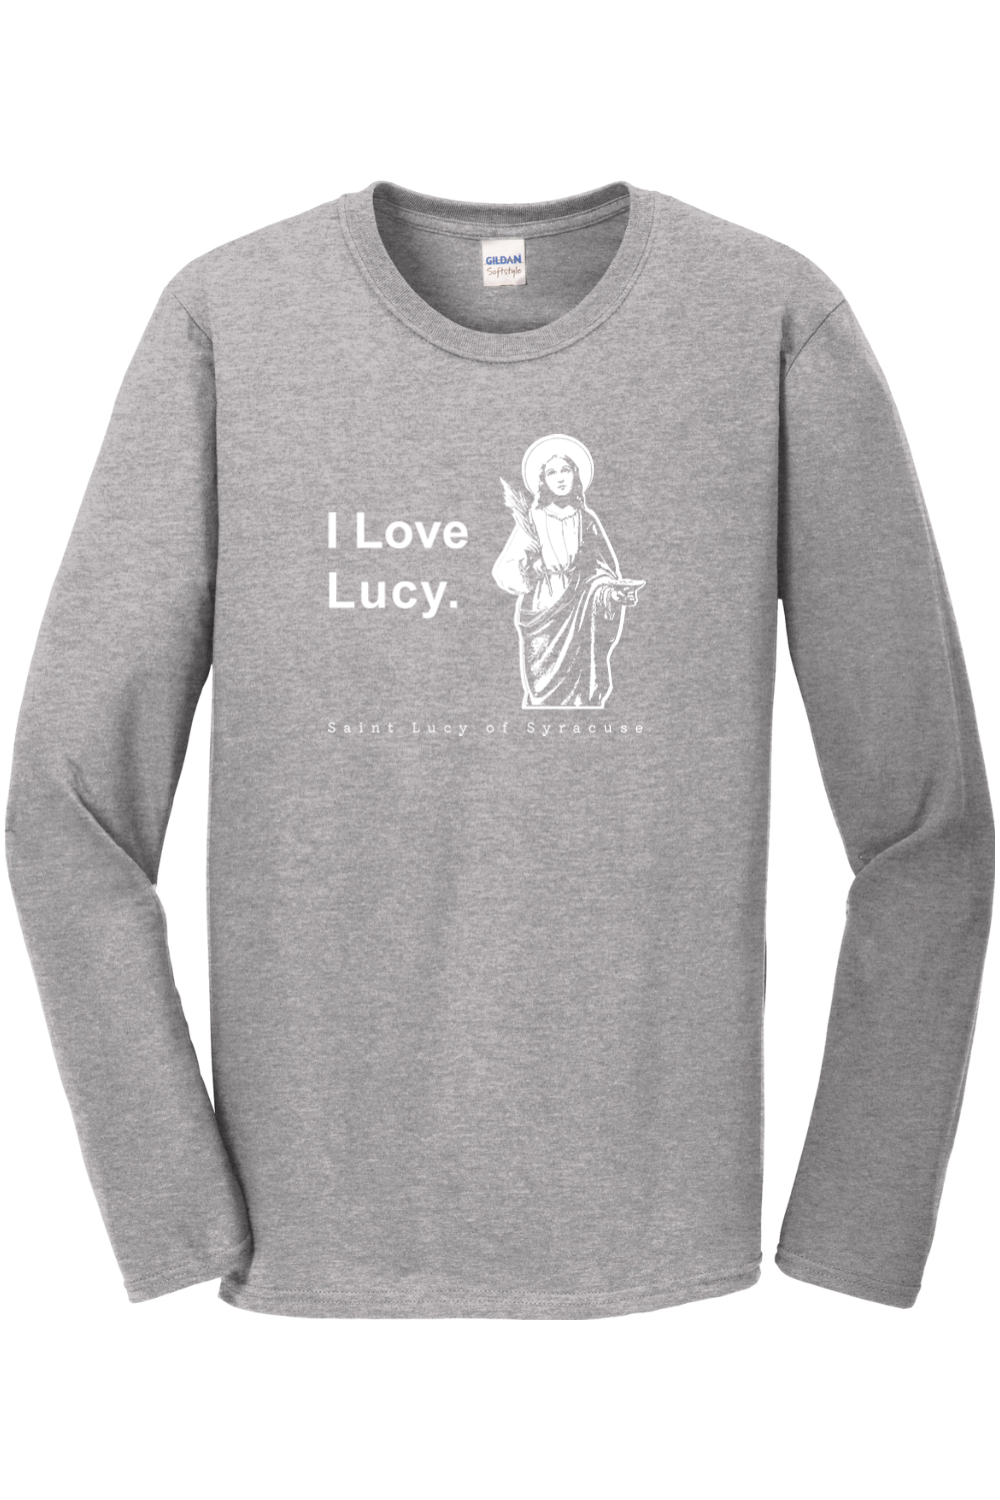 I Love Lucy - St. Lucy Long Sleeve